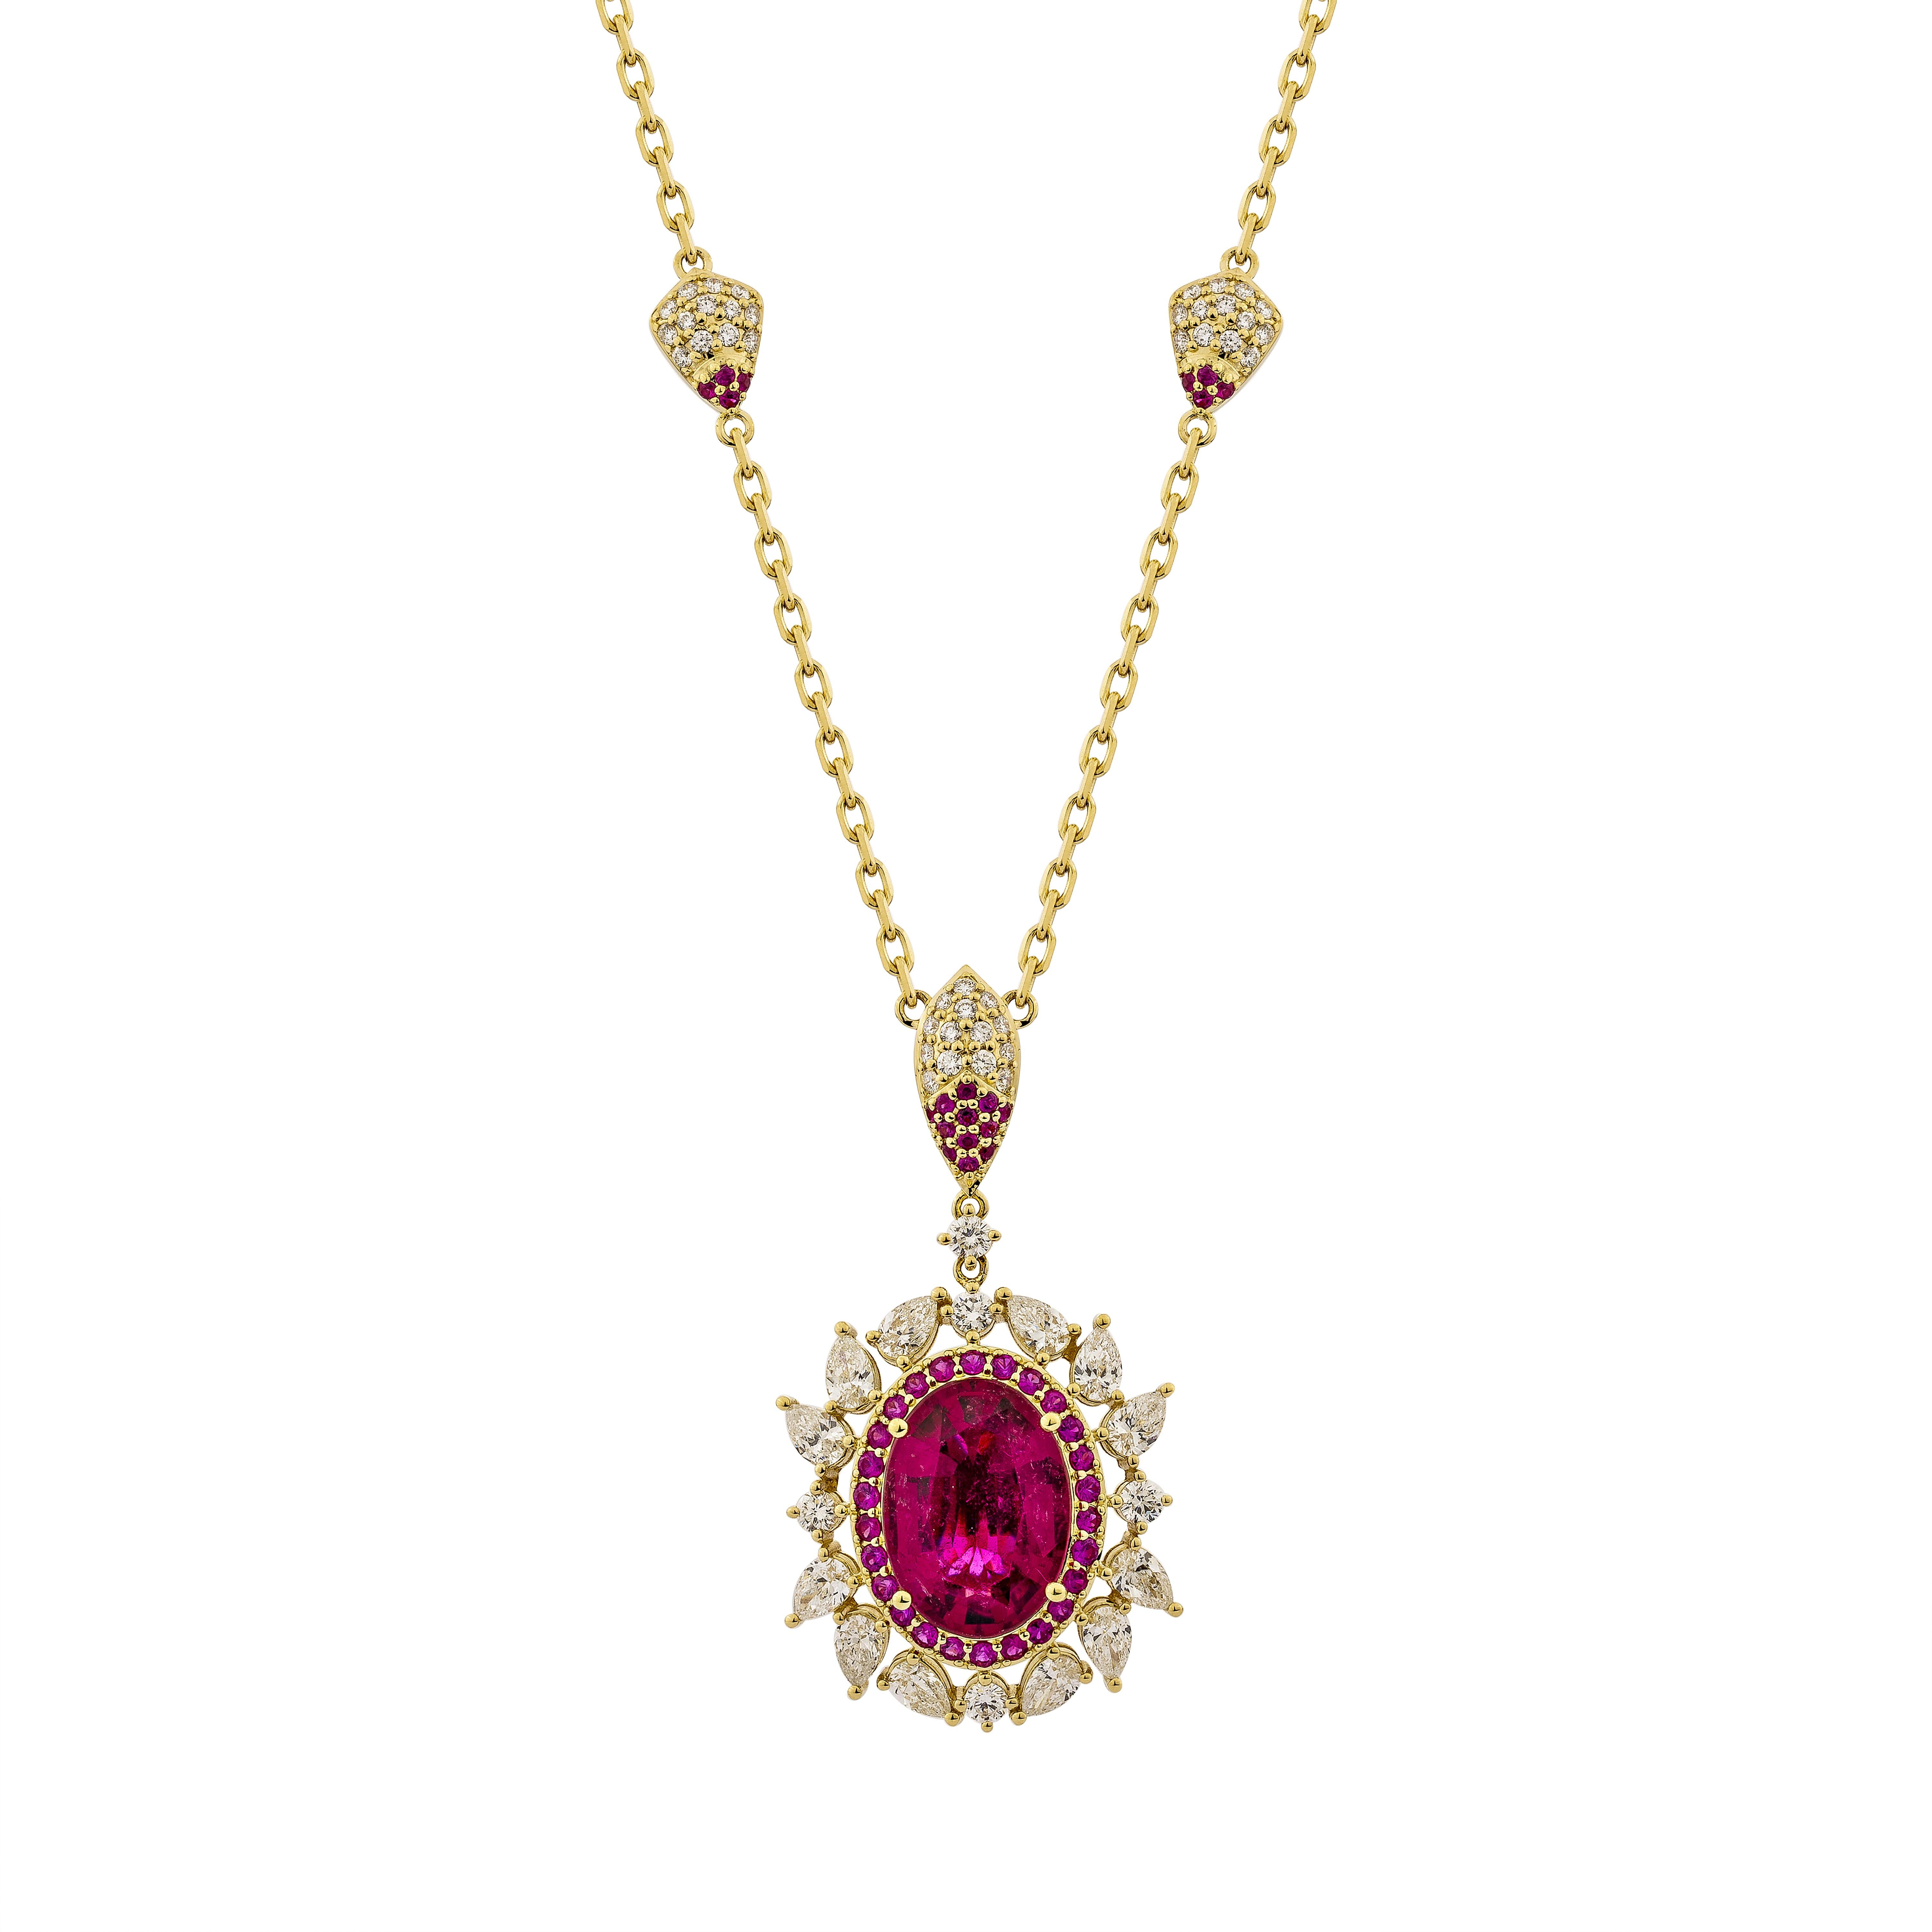 Sunita Nahata showcases an exquisite diamond studded Rubellite jewelry set that exudes grace and elegance. This exquisite 18Karat yellow gold set is ideal for any special occasion because it combines traditional elegance with modern